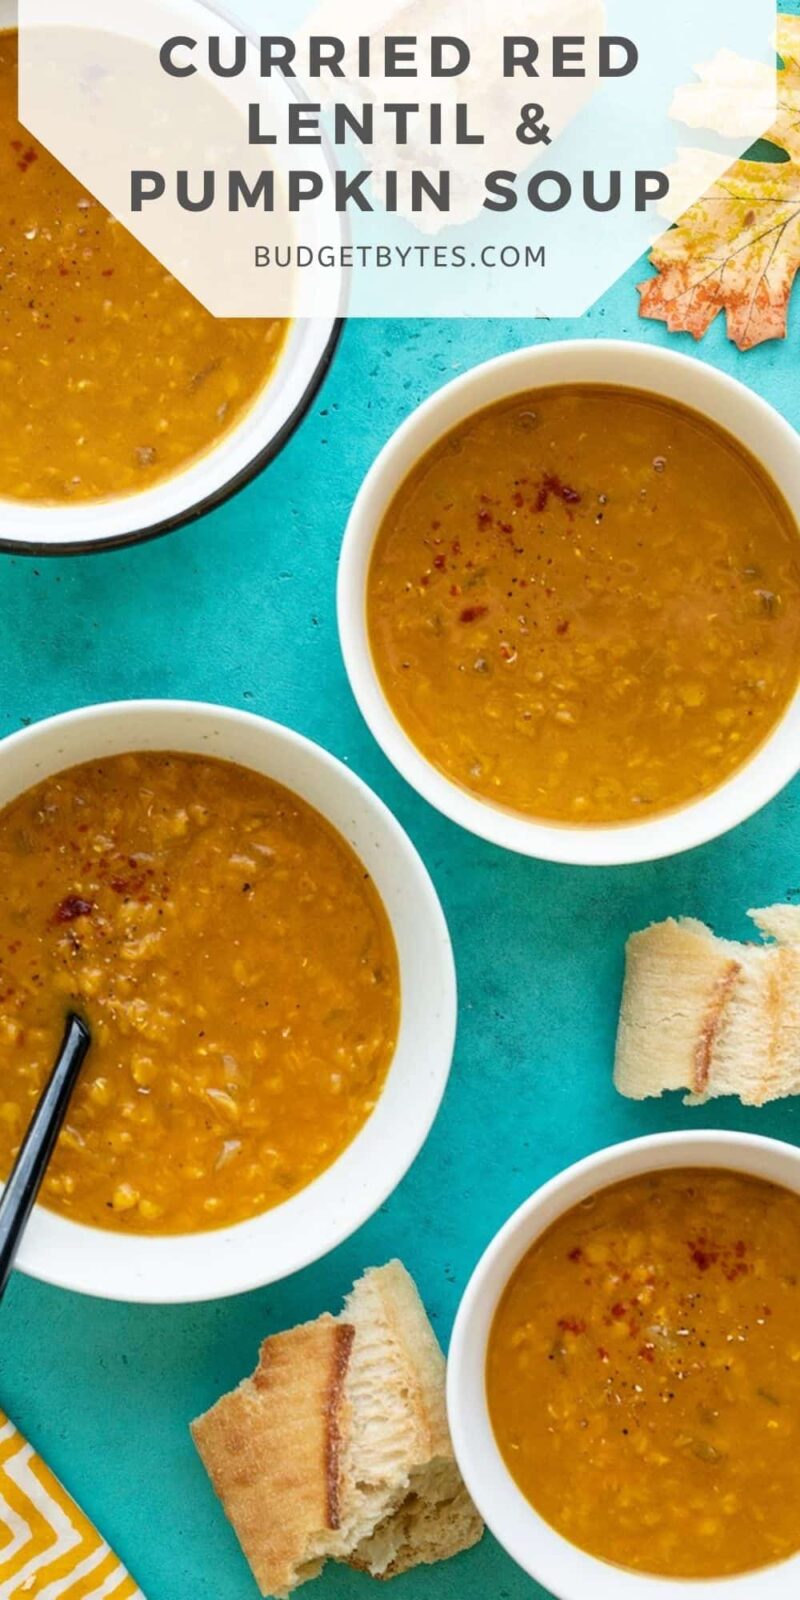 Four bowls of red lentil and pumpkin soup, title text at the top